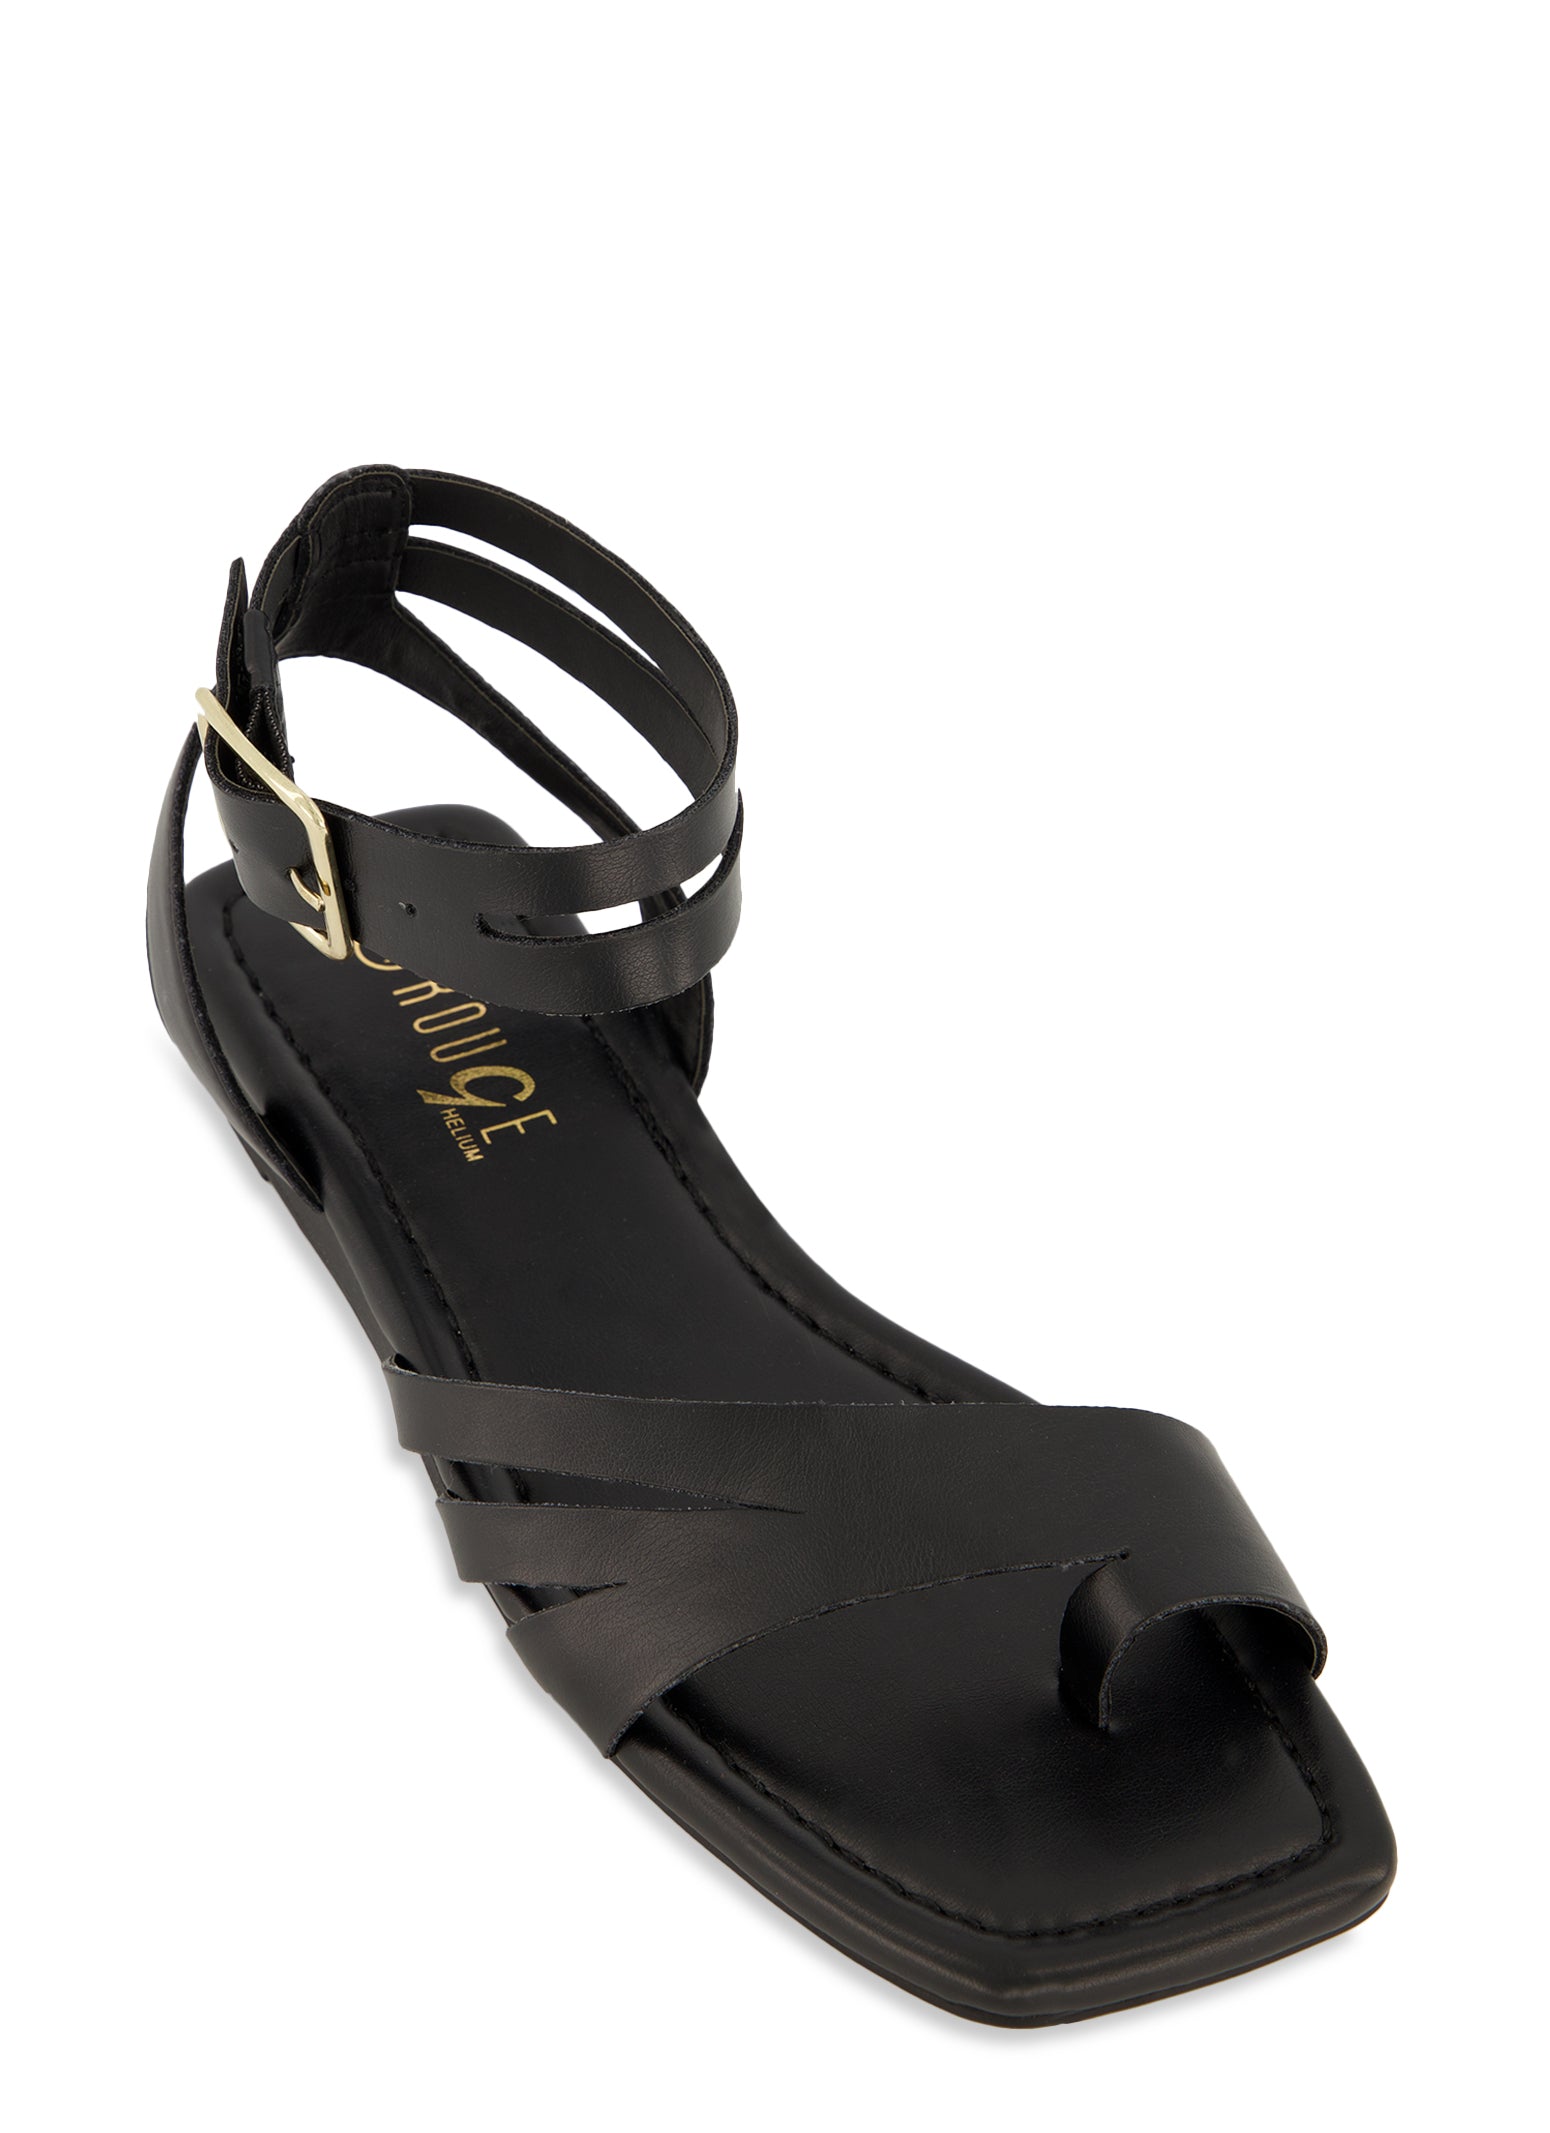 Toe Loop Cut Out Band Buckle Strap Sandals